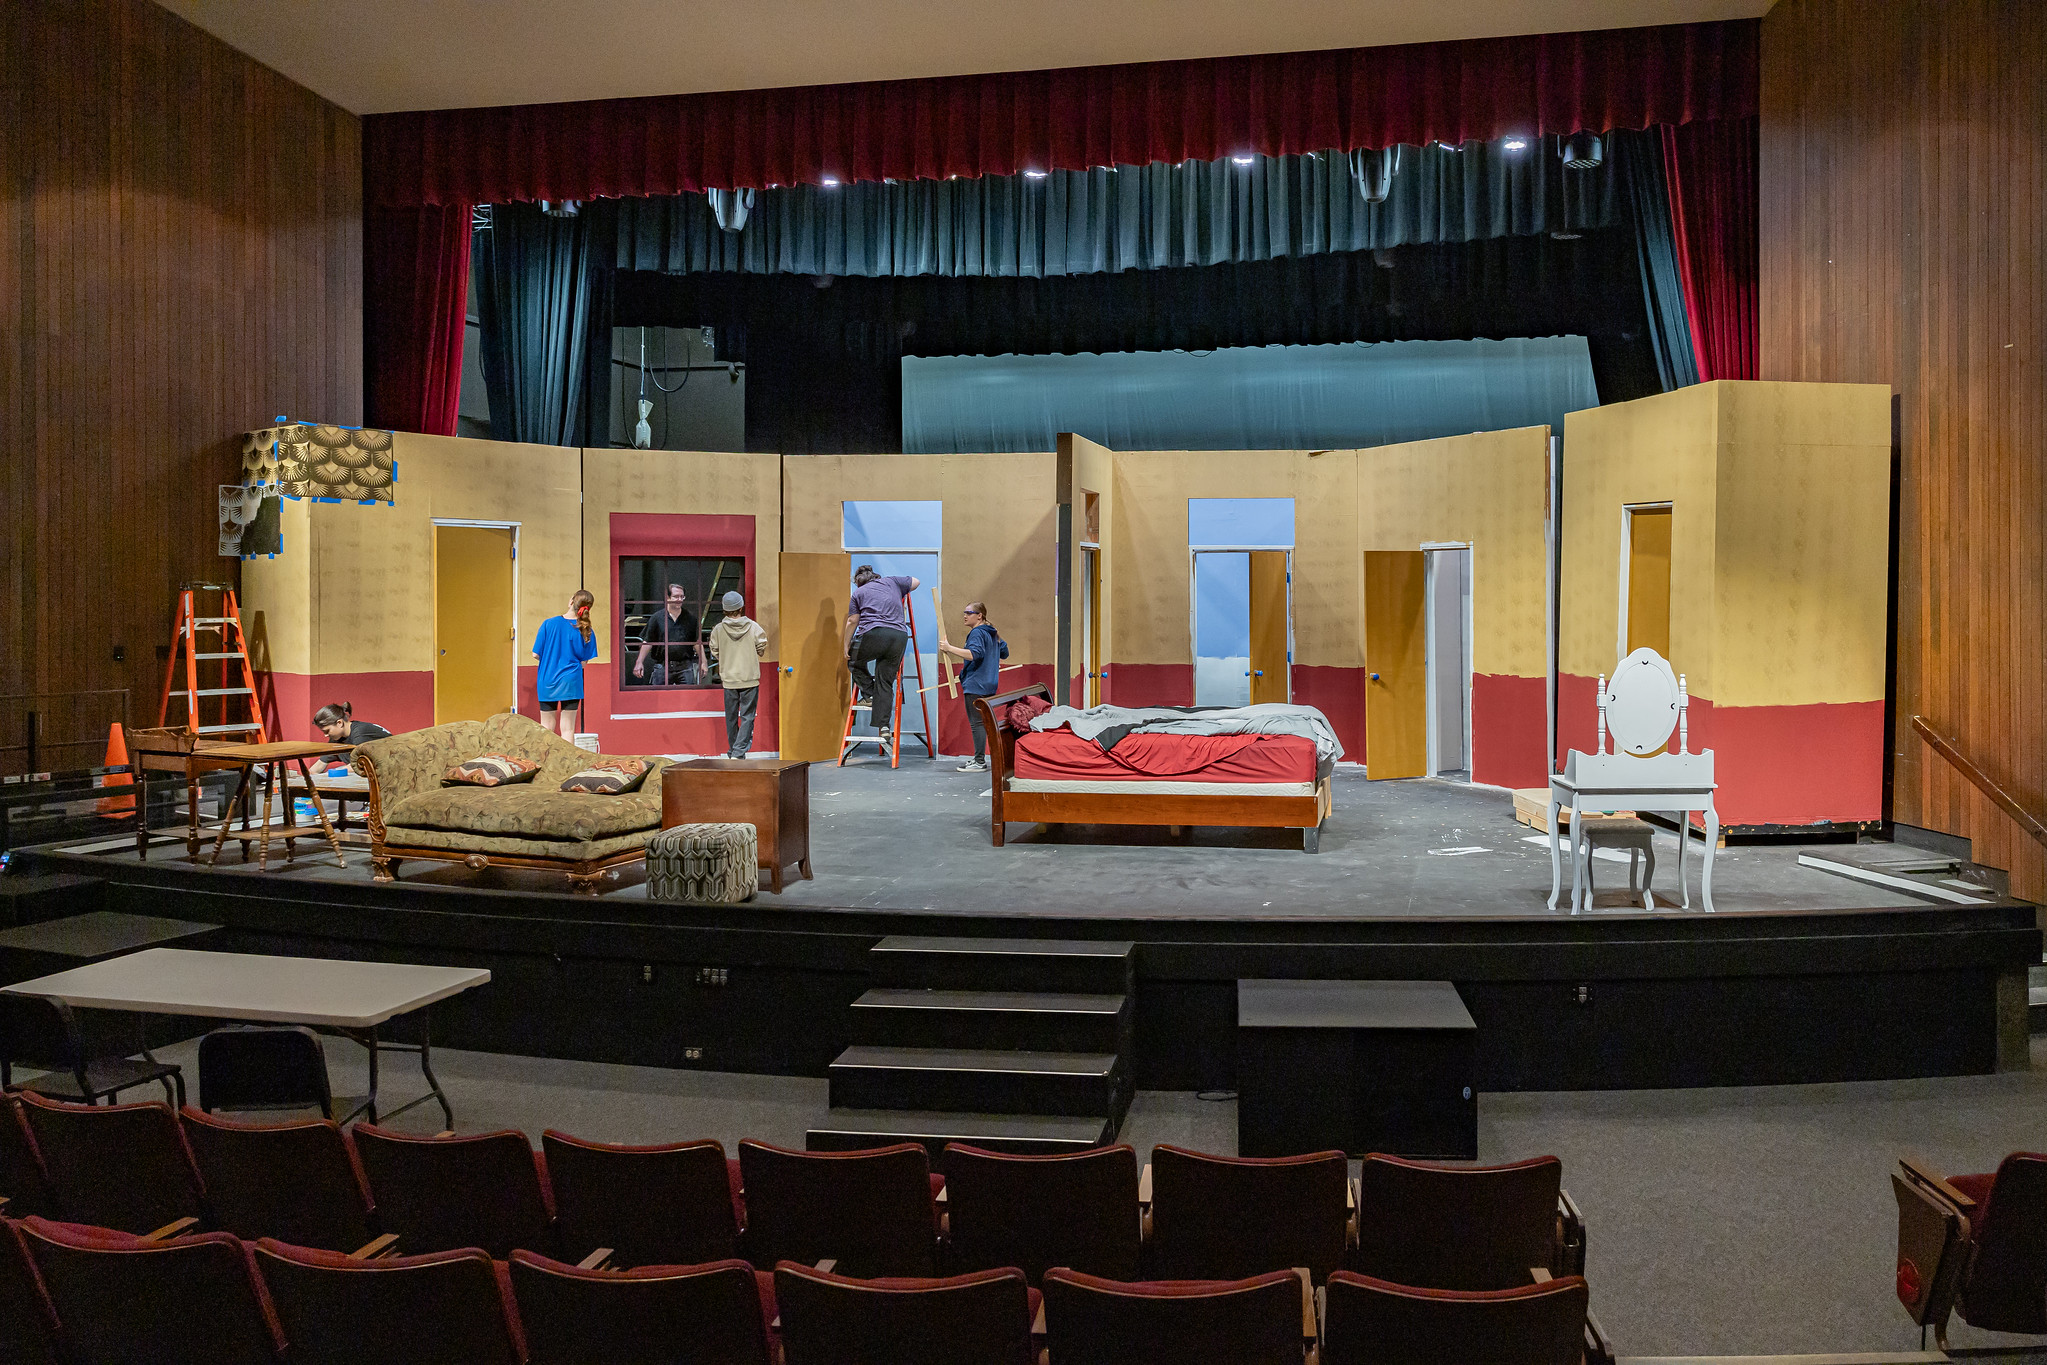 Students building stage set in Dietrich Theatre